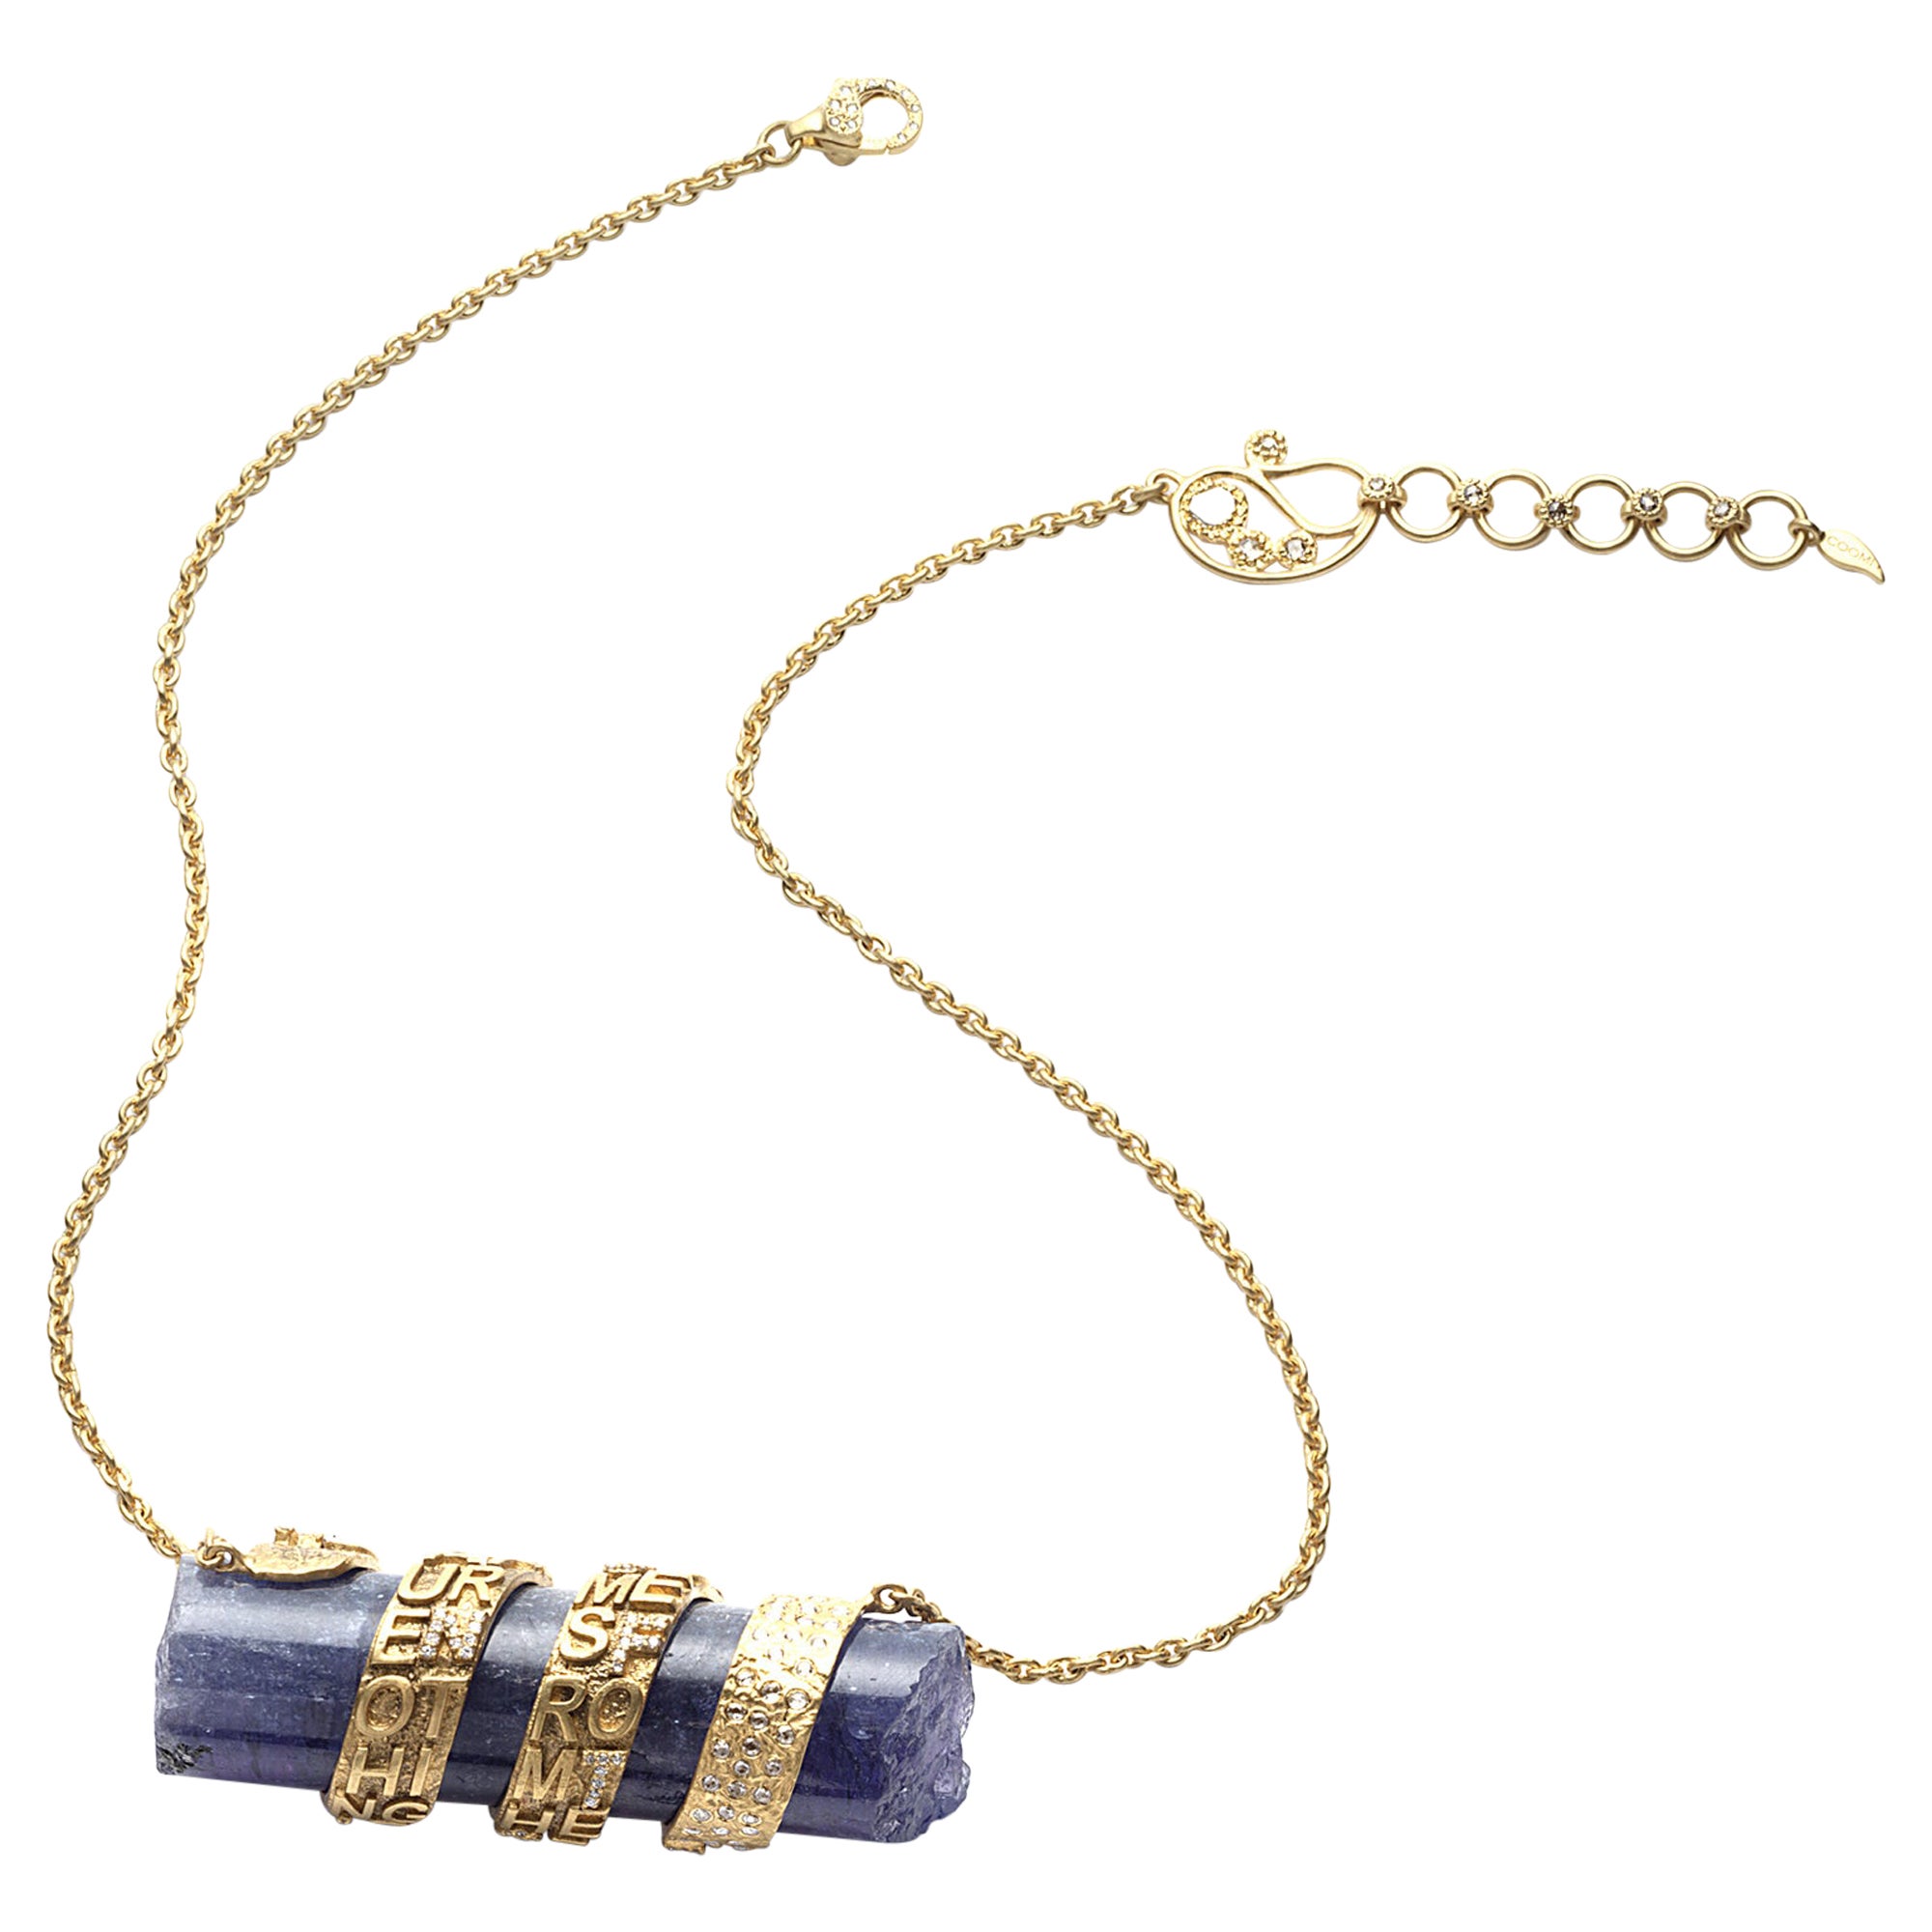 Sagrada Passion Necklace in 20K Yellow Gold with Rough Tanzanite and Diamonds